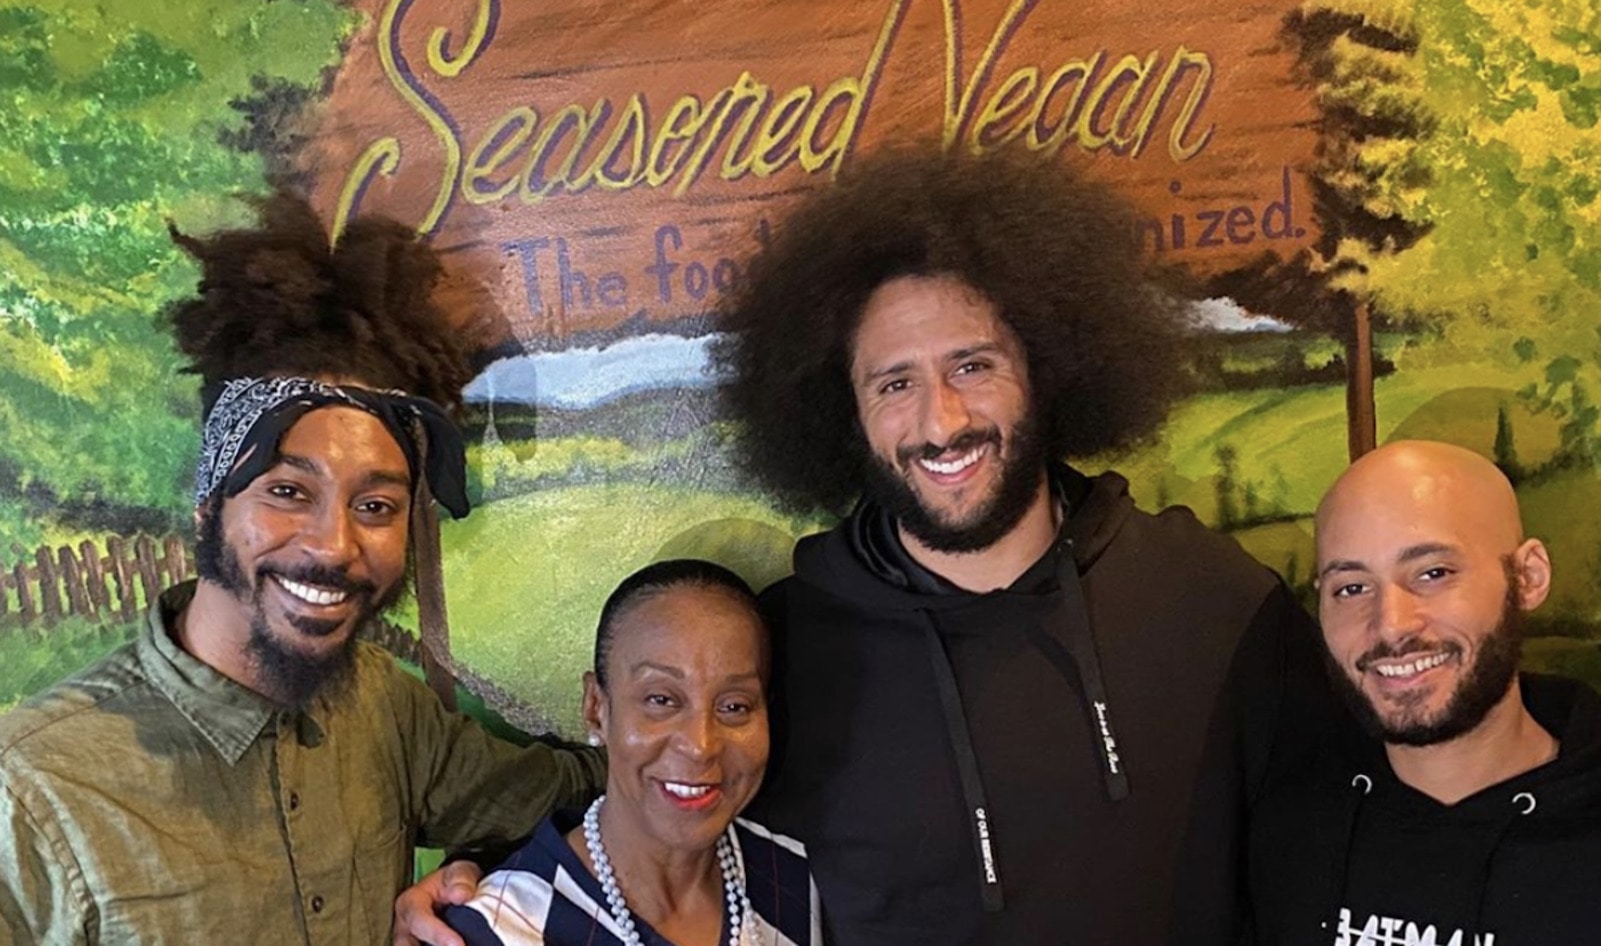 Black-Owned Seasoned Vegan Restaurants Launch a New Online Market with All the Goodies&nbsp;